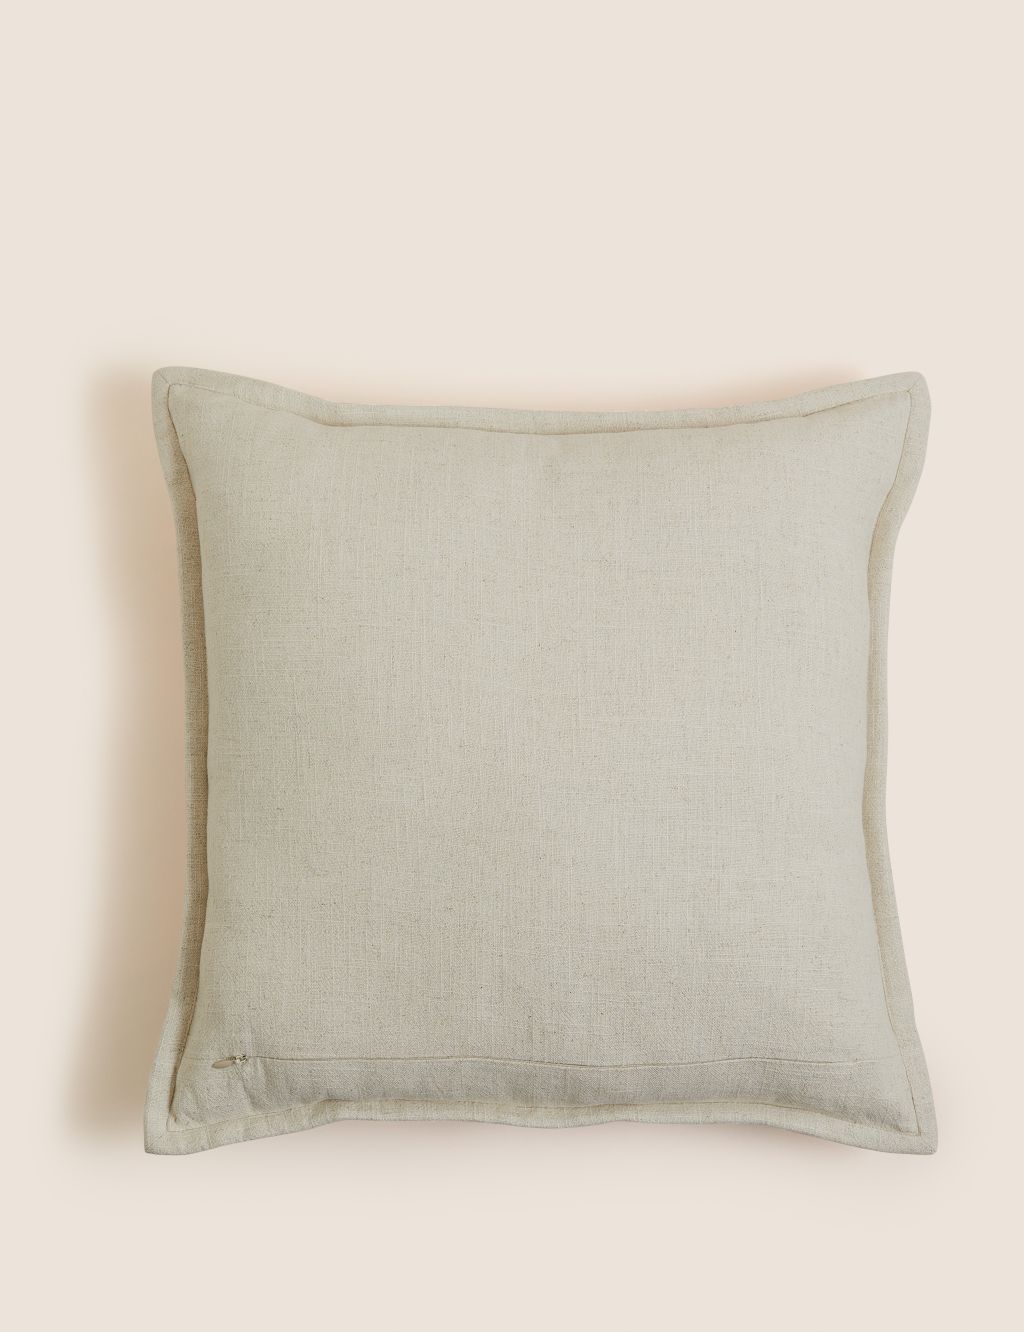 Cotton with Linen Textured Cushion image 4